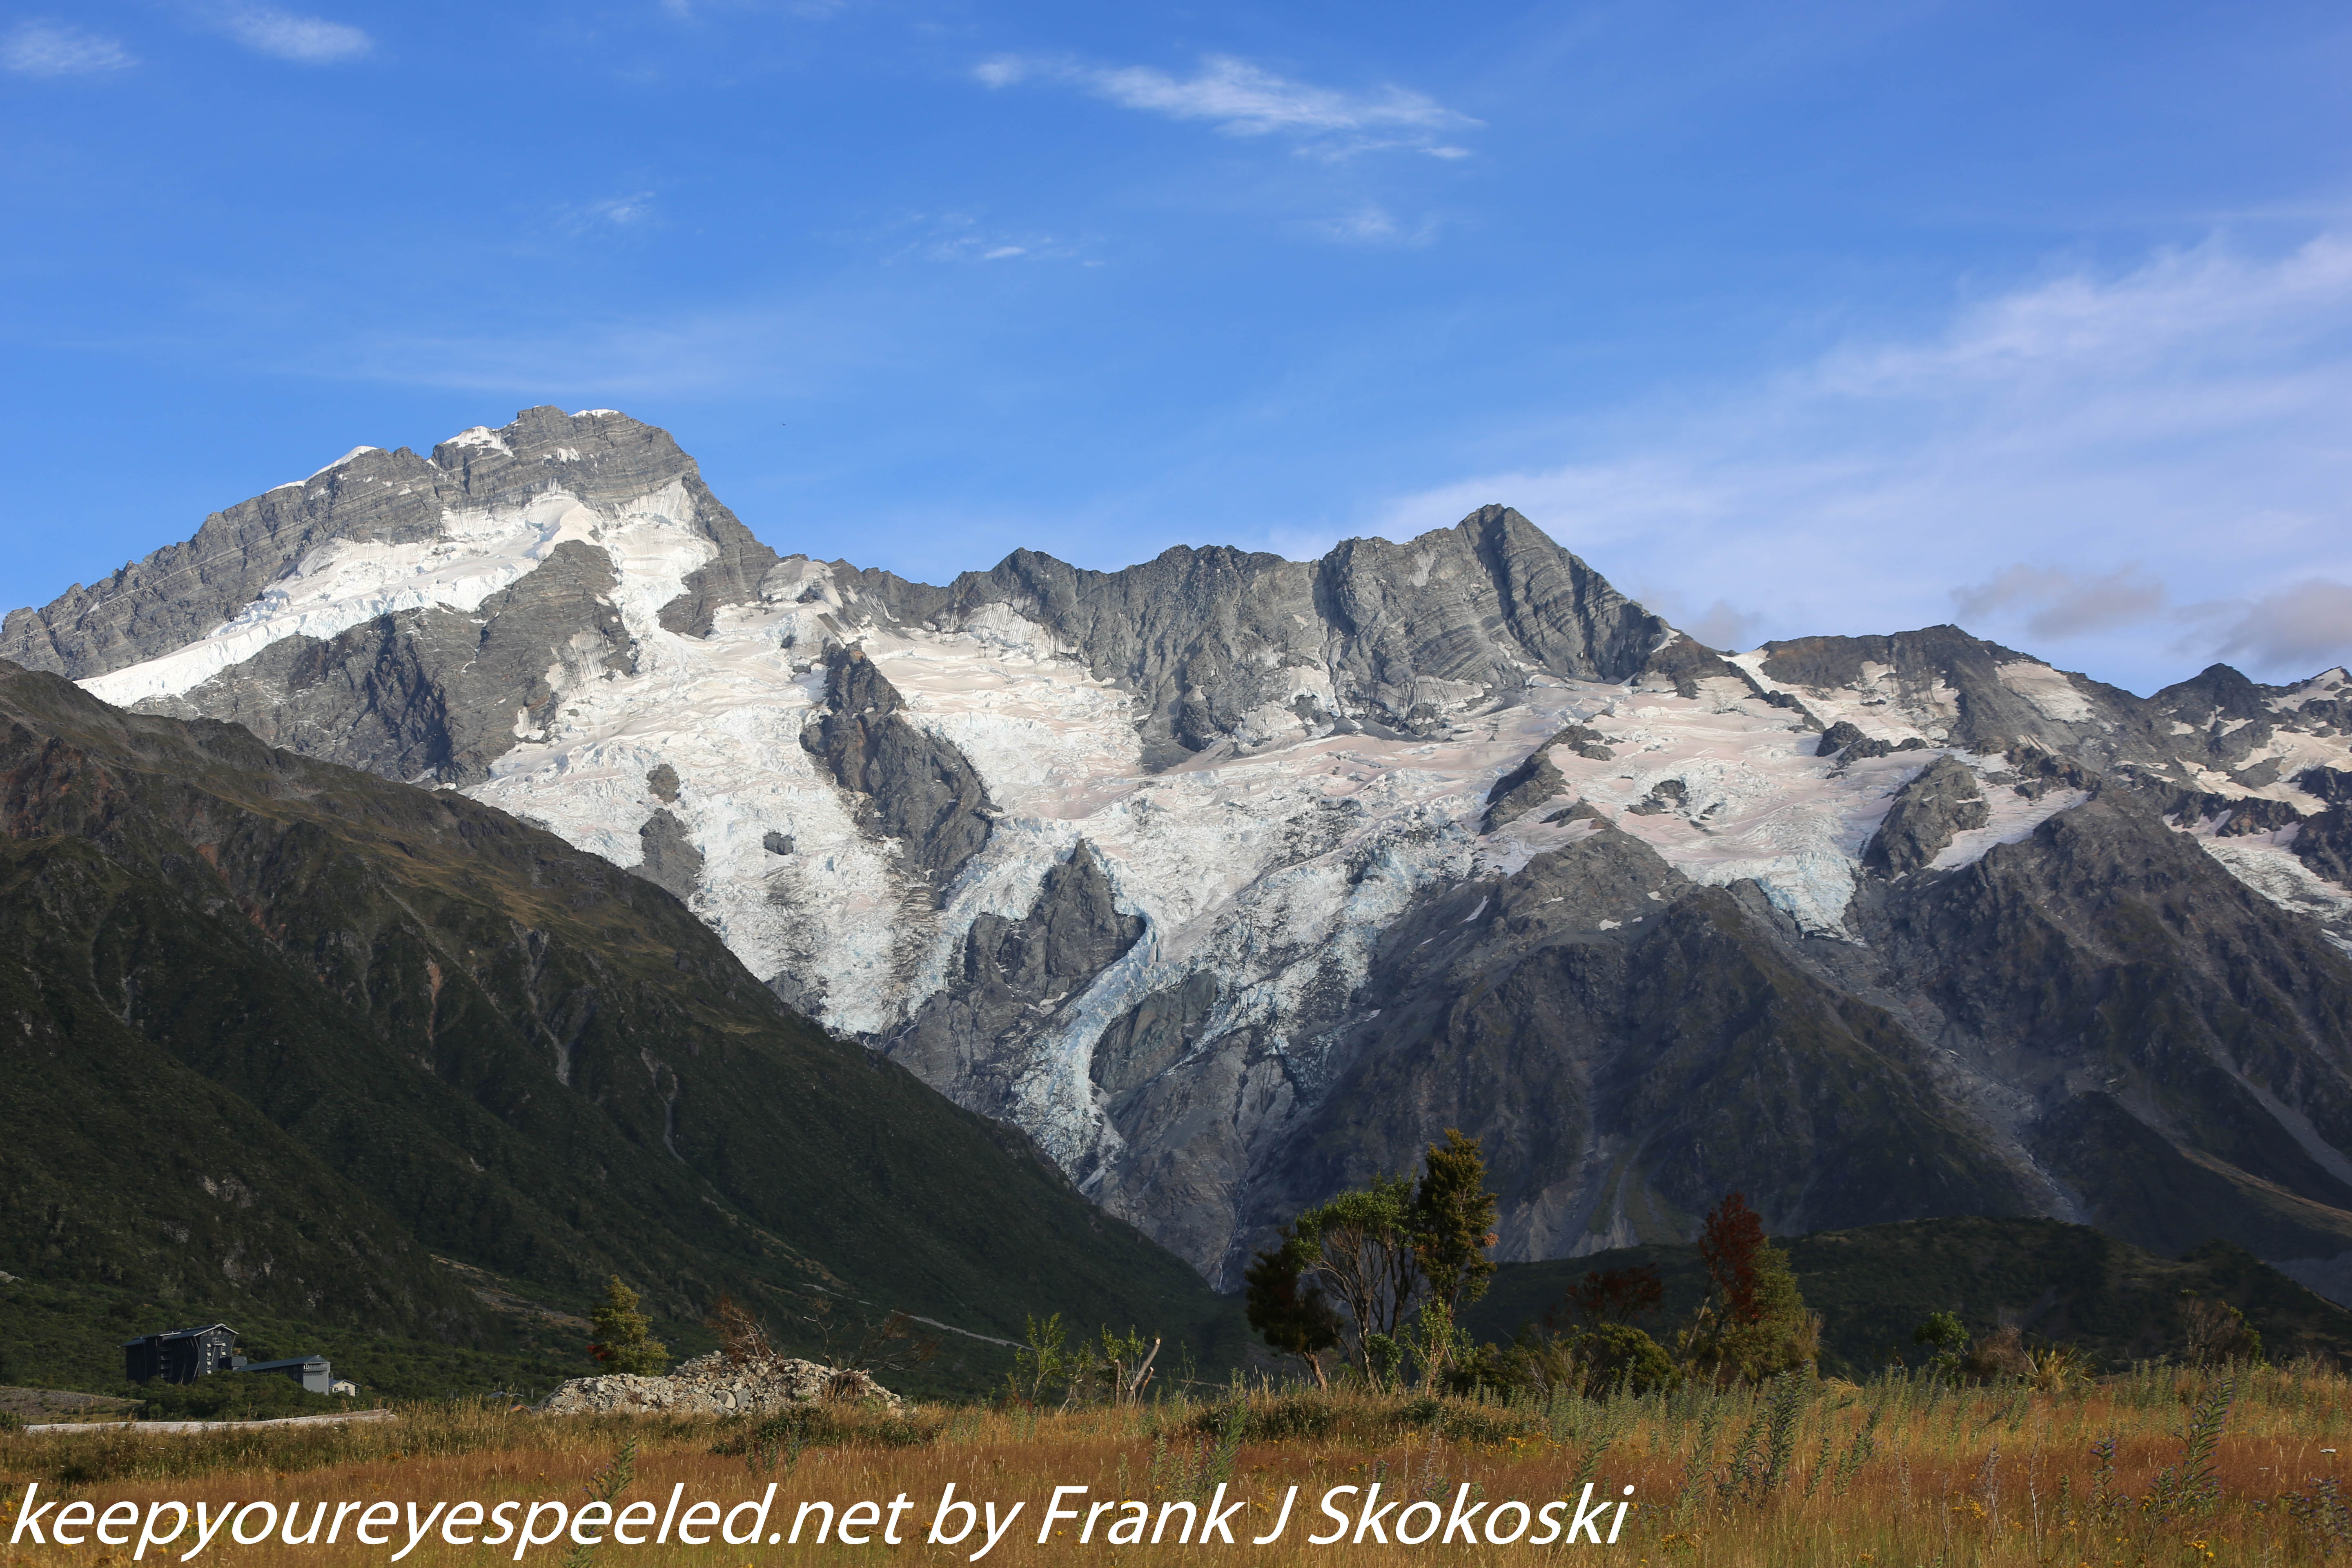 New-Zealand-Day-Six-Mount-Cook-14-of-23